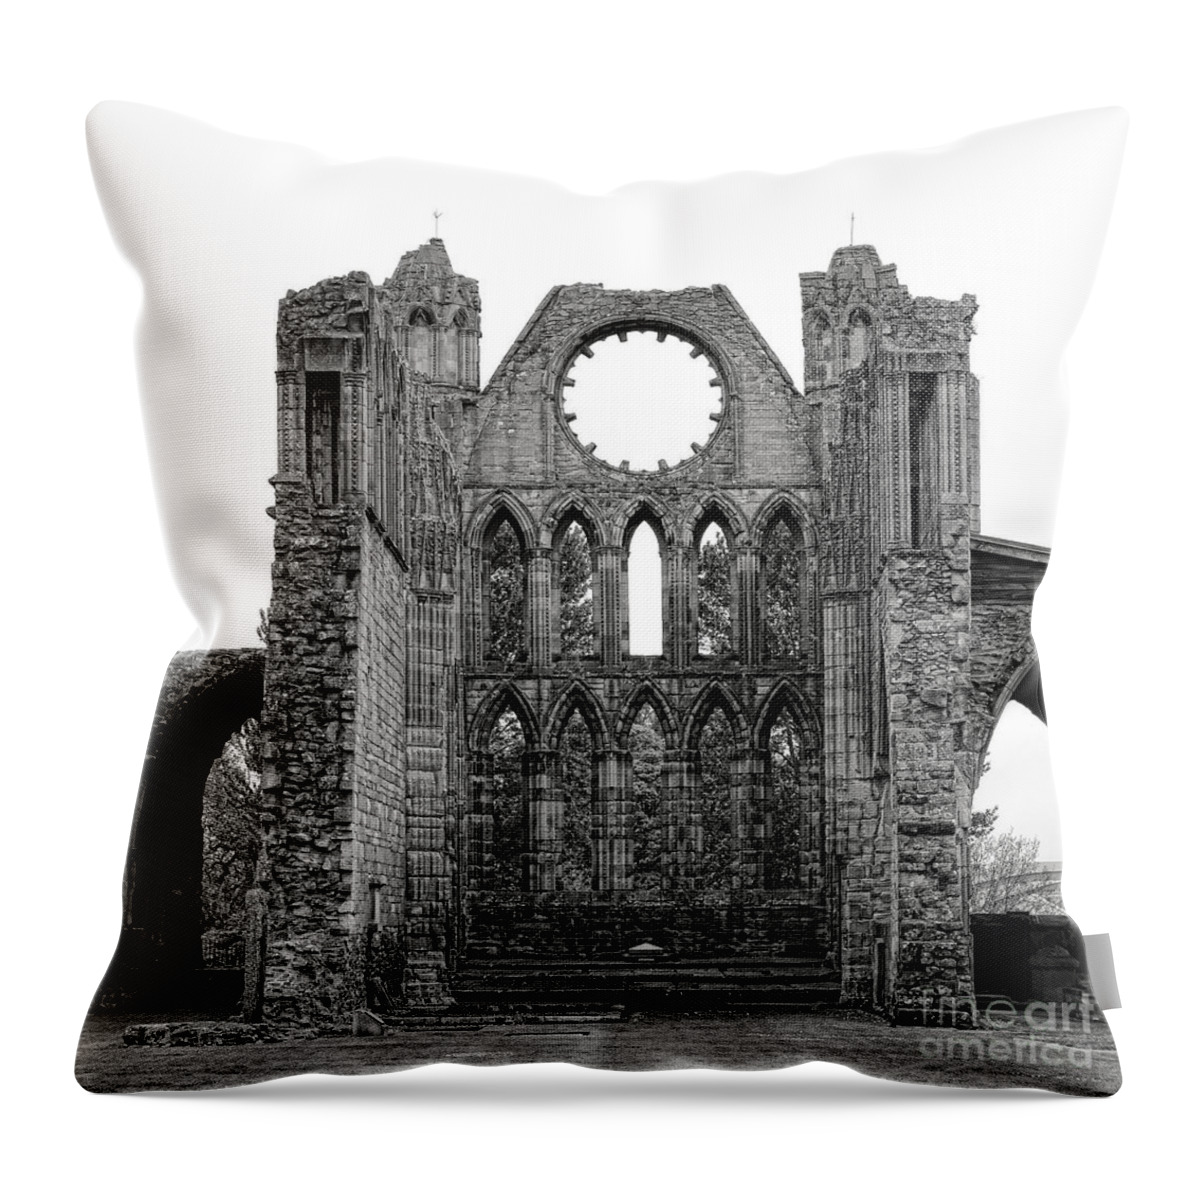 Elgin Throw Pillow featuring the photograph Elgin Cathedral Apse by Olivier Le Queinec